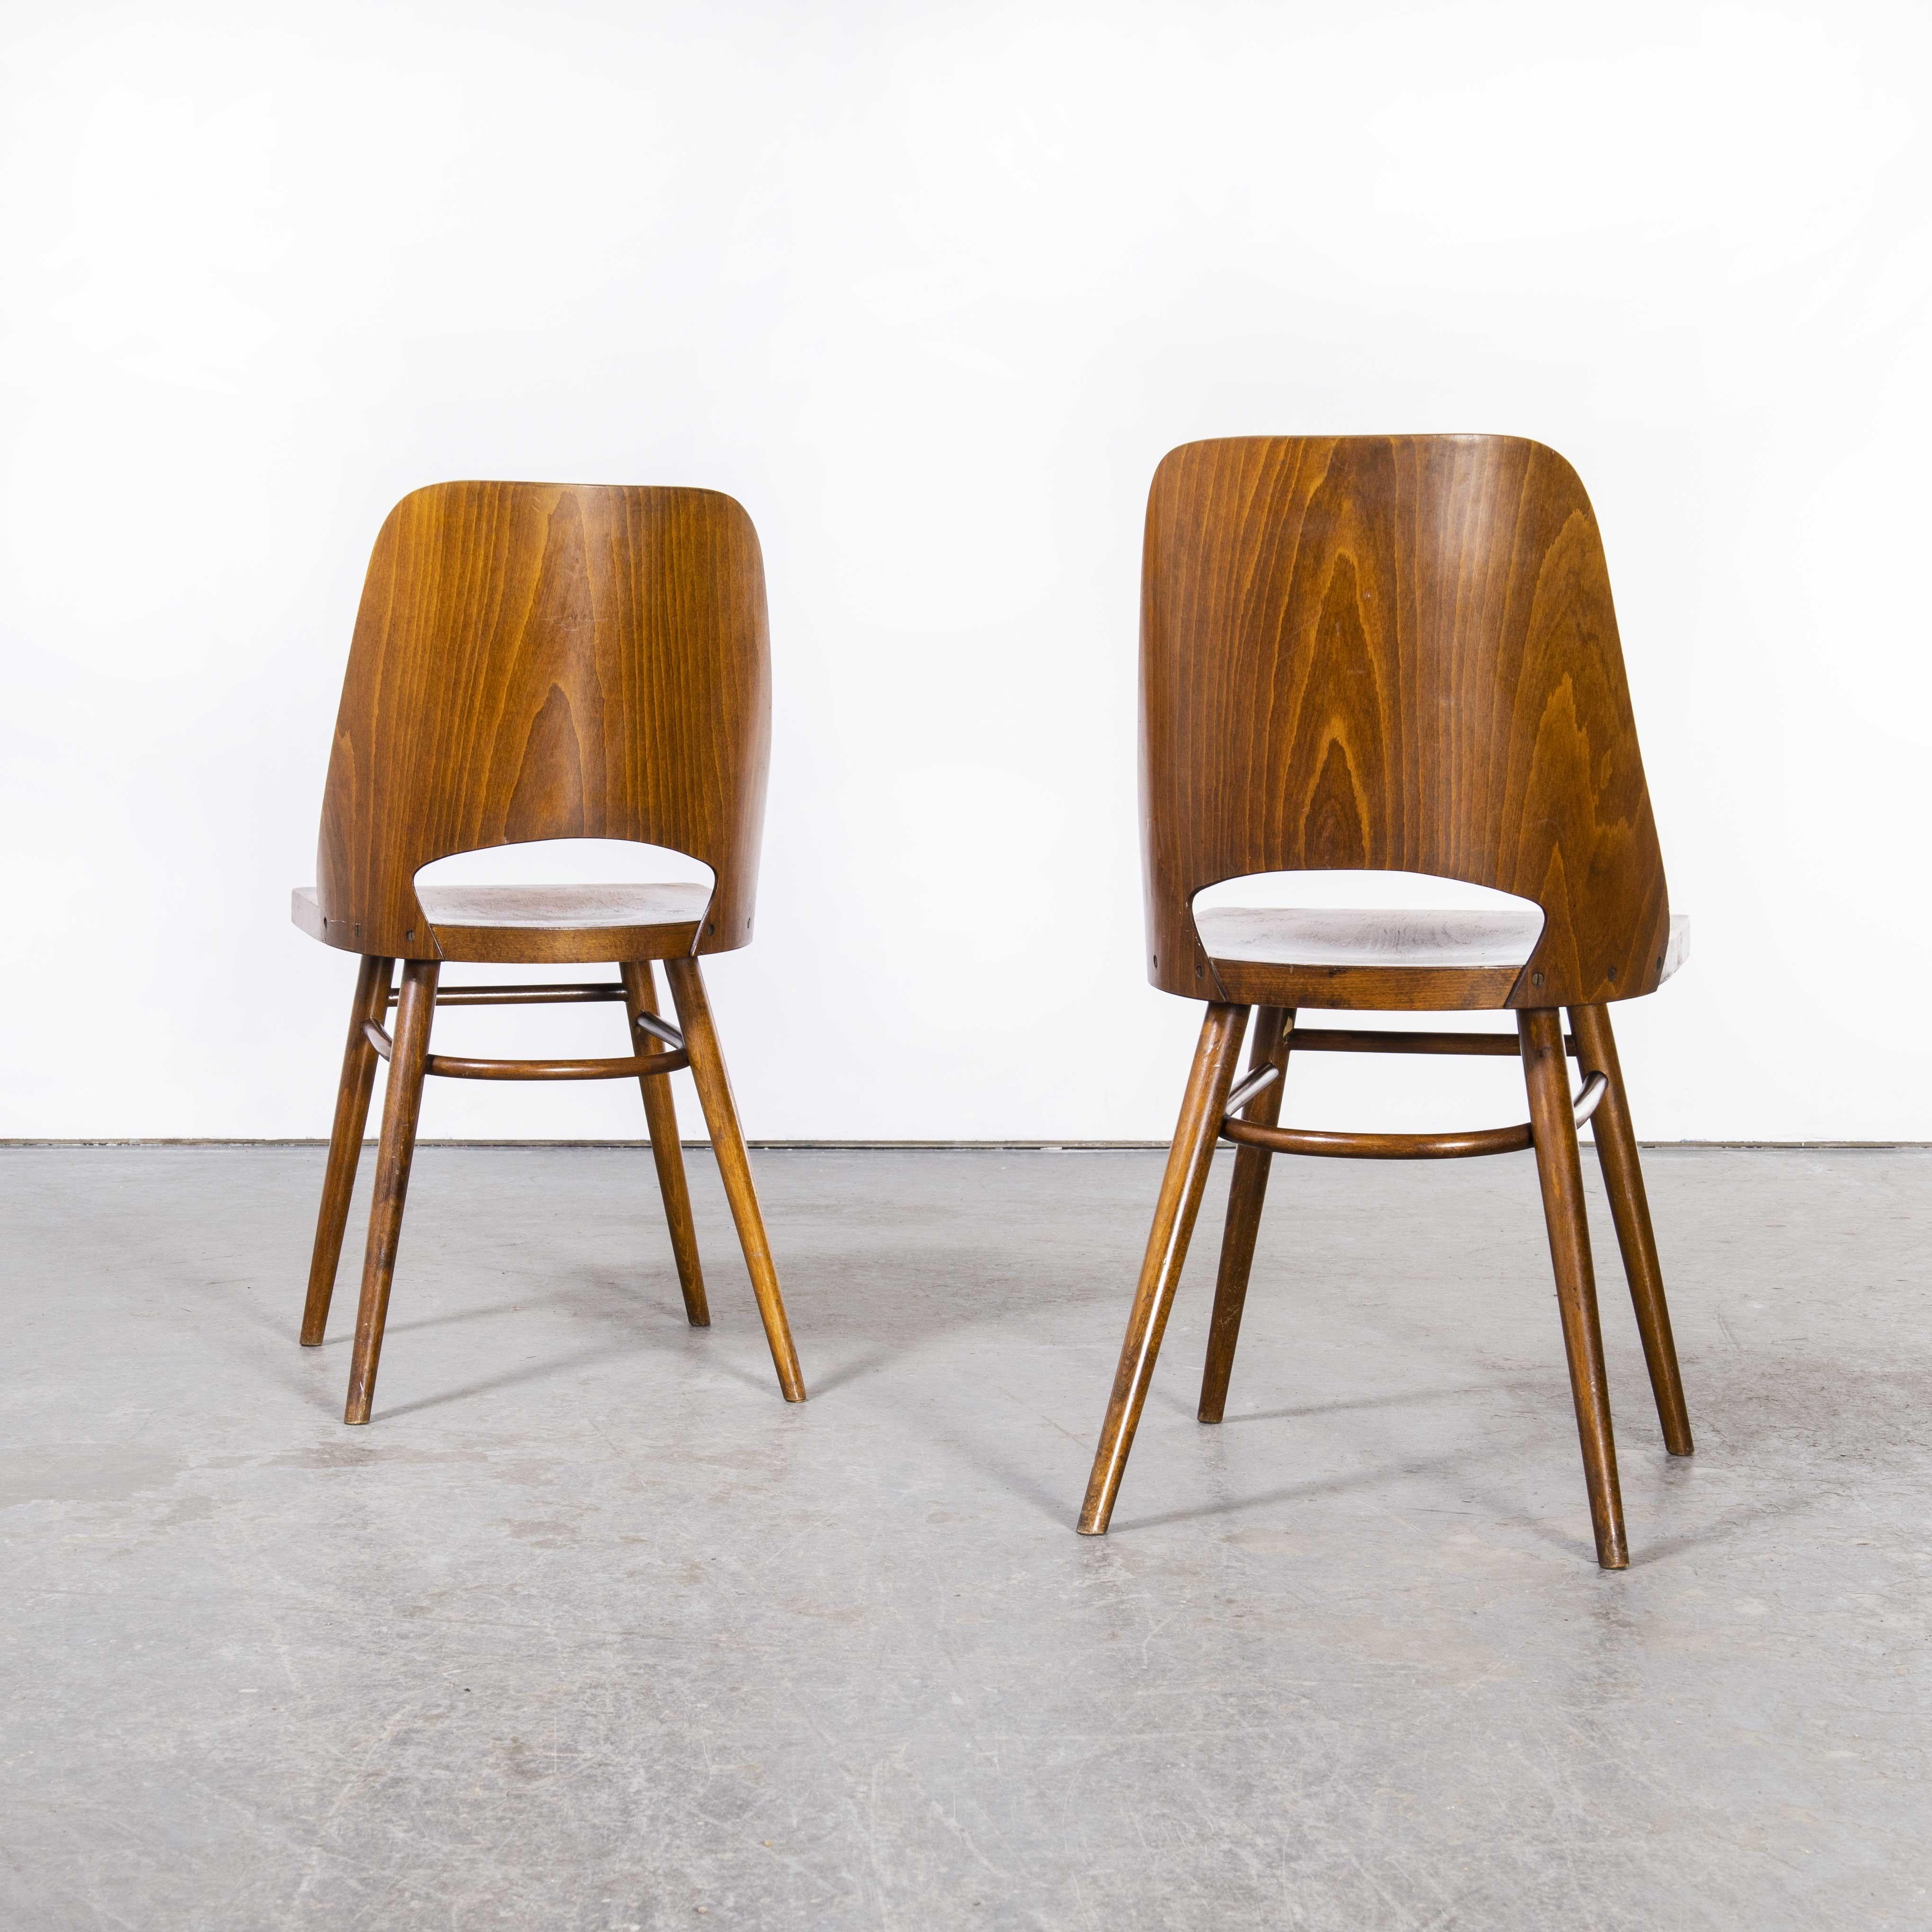 1950's Honey Beech Dining Chairs by Radomir Hoffman, Pair For Sale 4